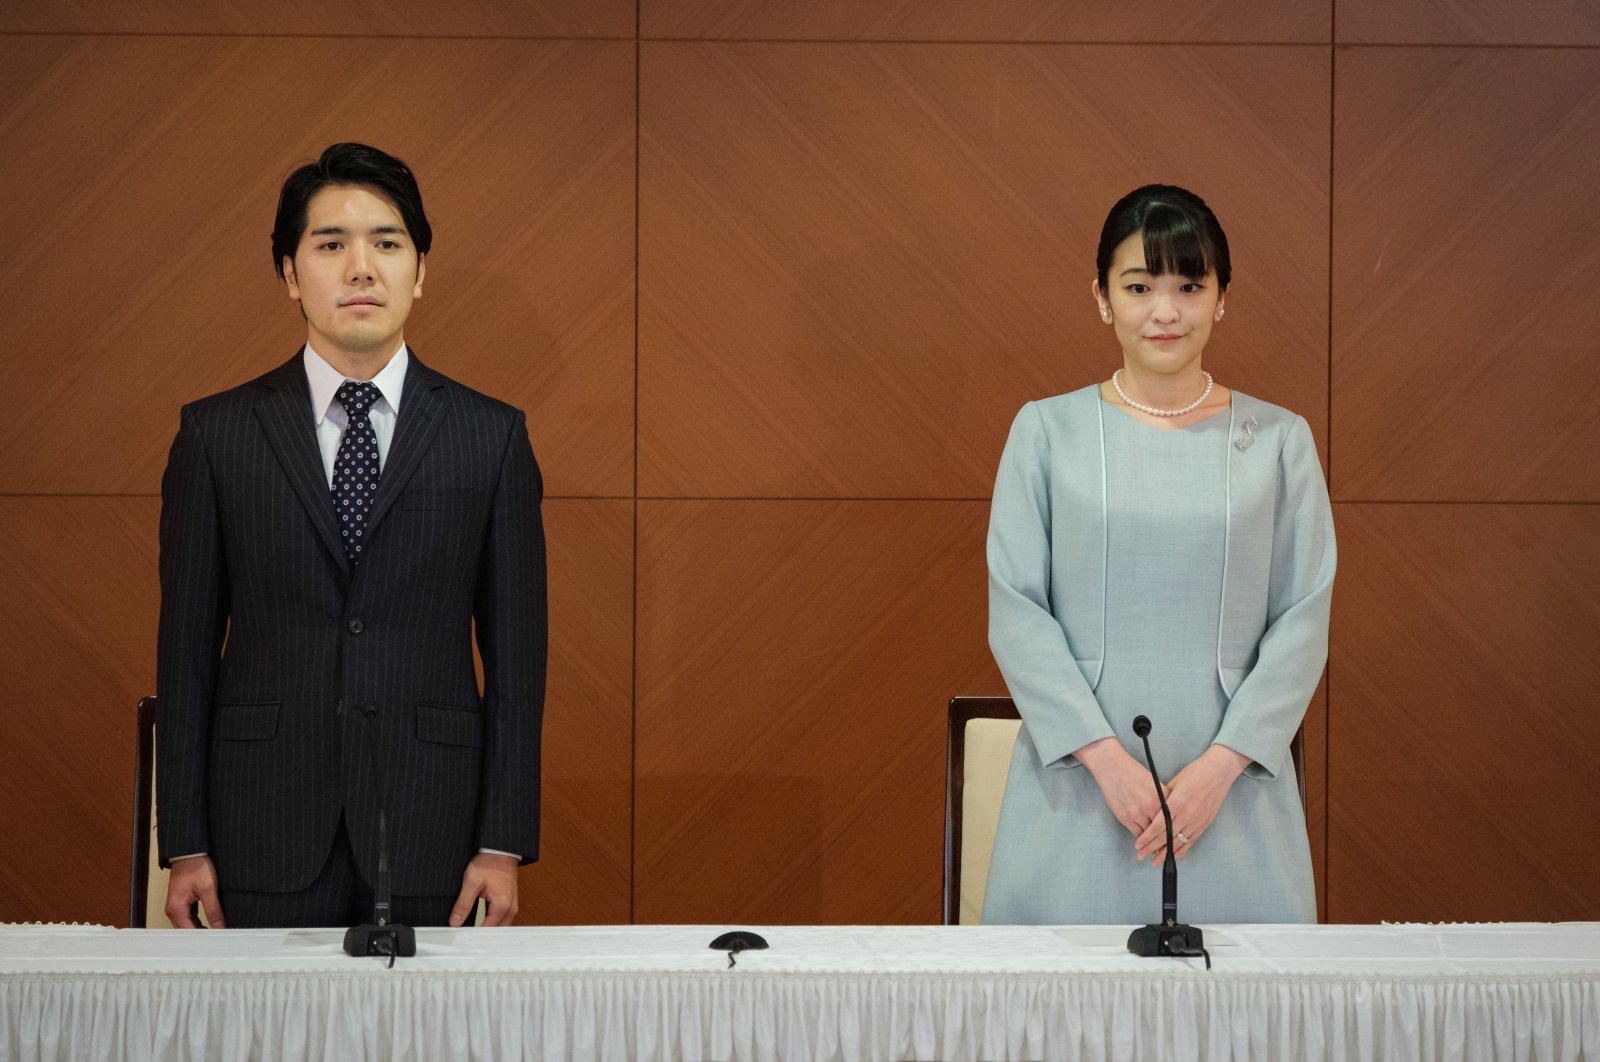 Princess Mako (R), the elder daughter of Prince Akishino and Princess Kiko, and her husband Kei Komuro (L), a university friend of Princess Mako, poses during a press conference to announce their marriage registration at Grand Arc Hotel in Tokyo, Japan, Oct. 26, 2021. (EPA Photo) 